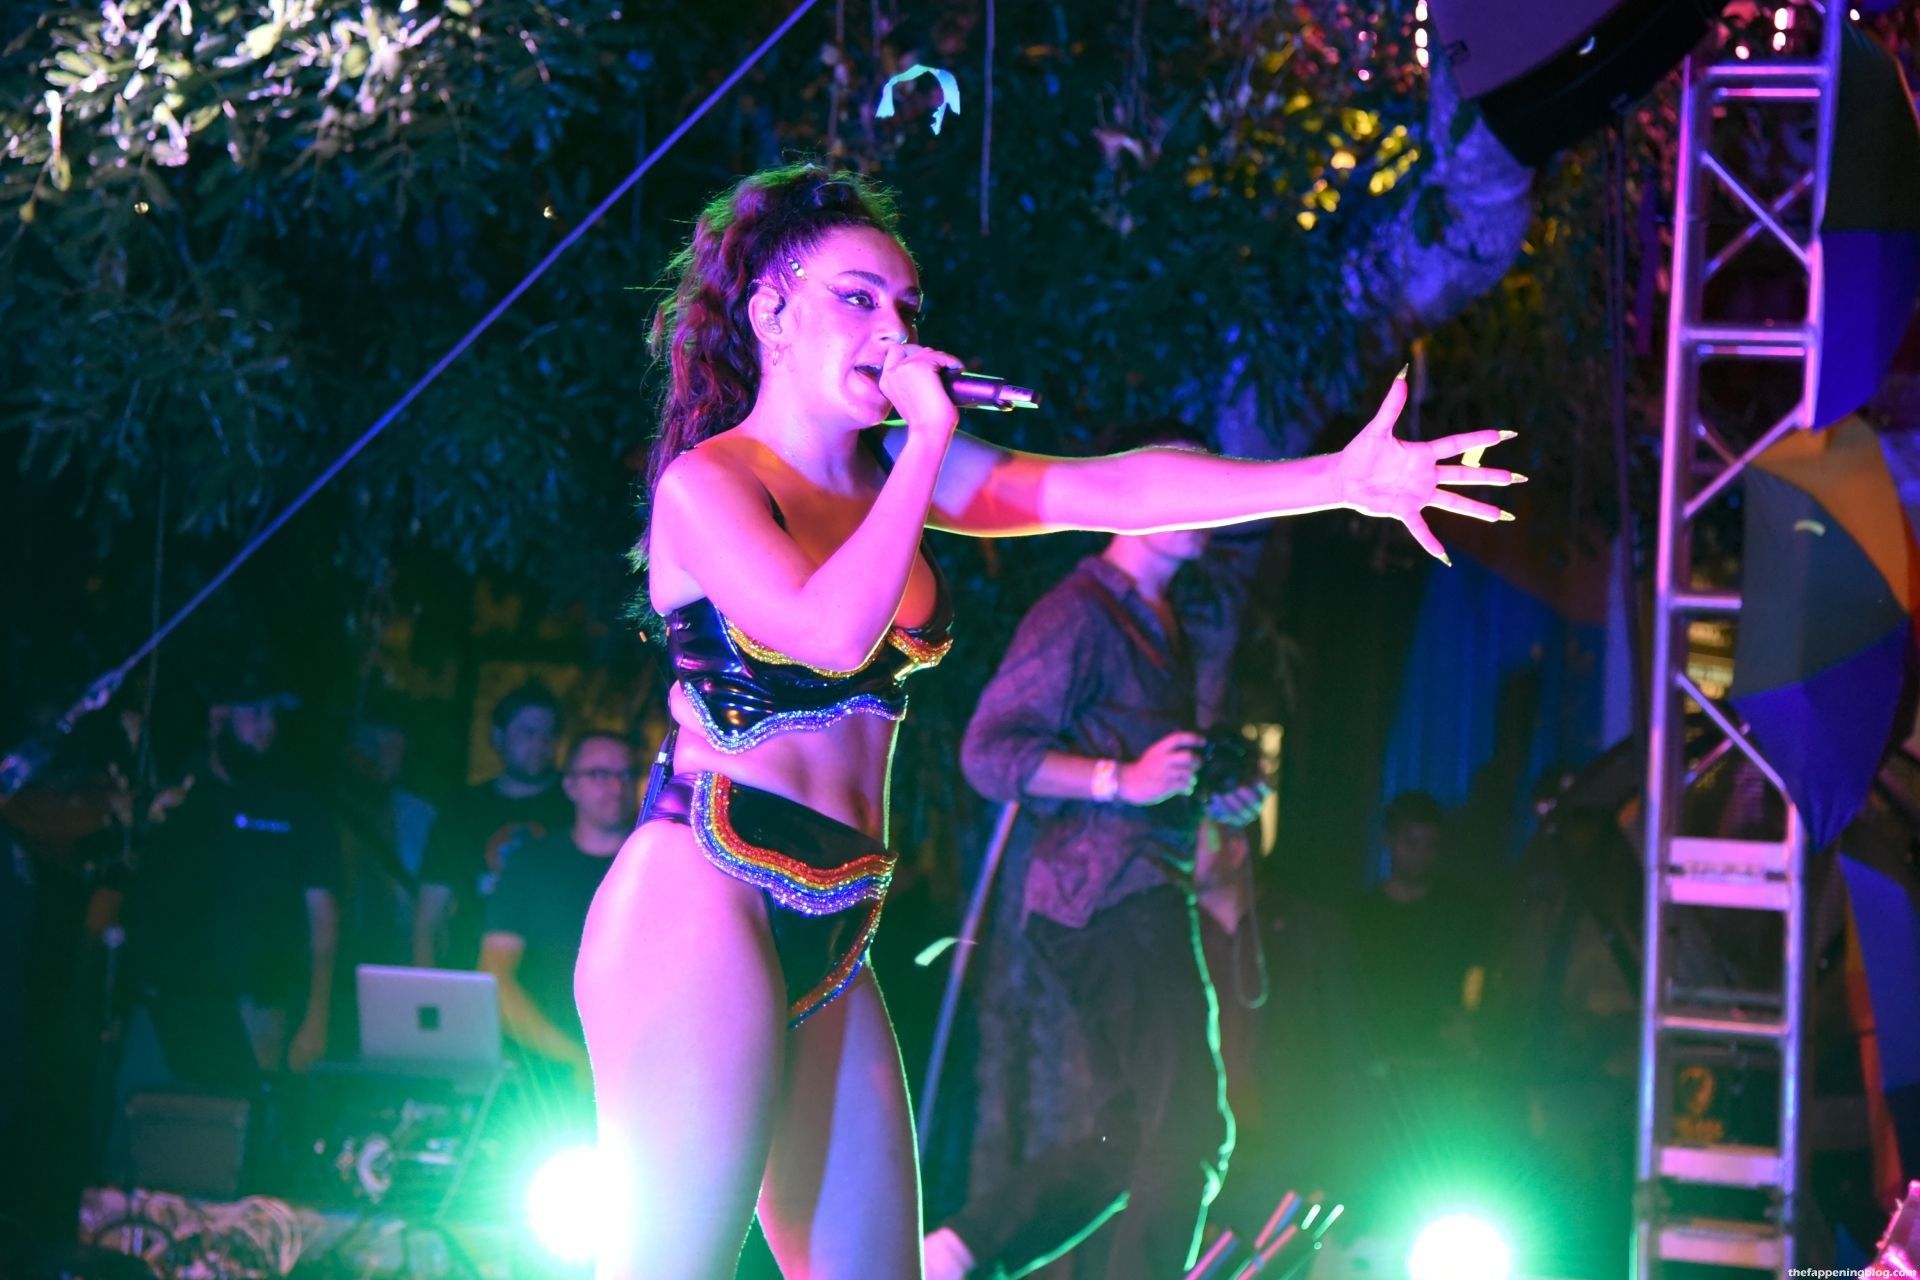 Charli-XCX-Sexy-on-Stage-15-thefappeningblog.com_.jpg